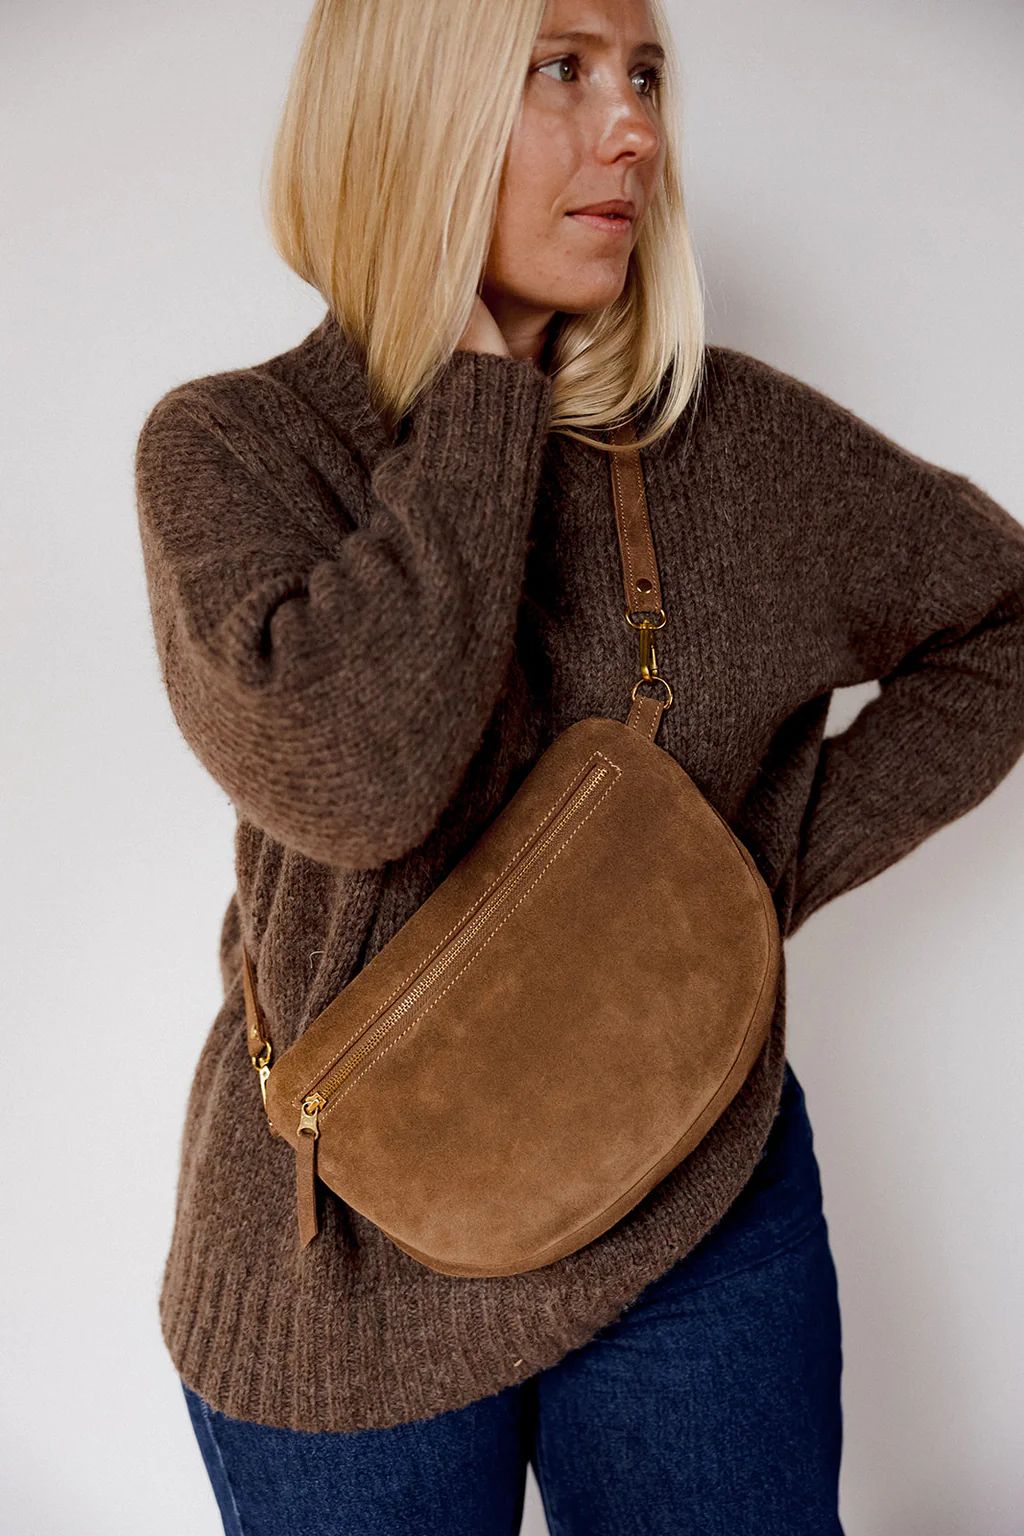 The Big Sling Bag, Caramel Suede | Abby Alley